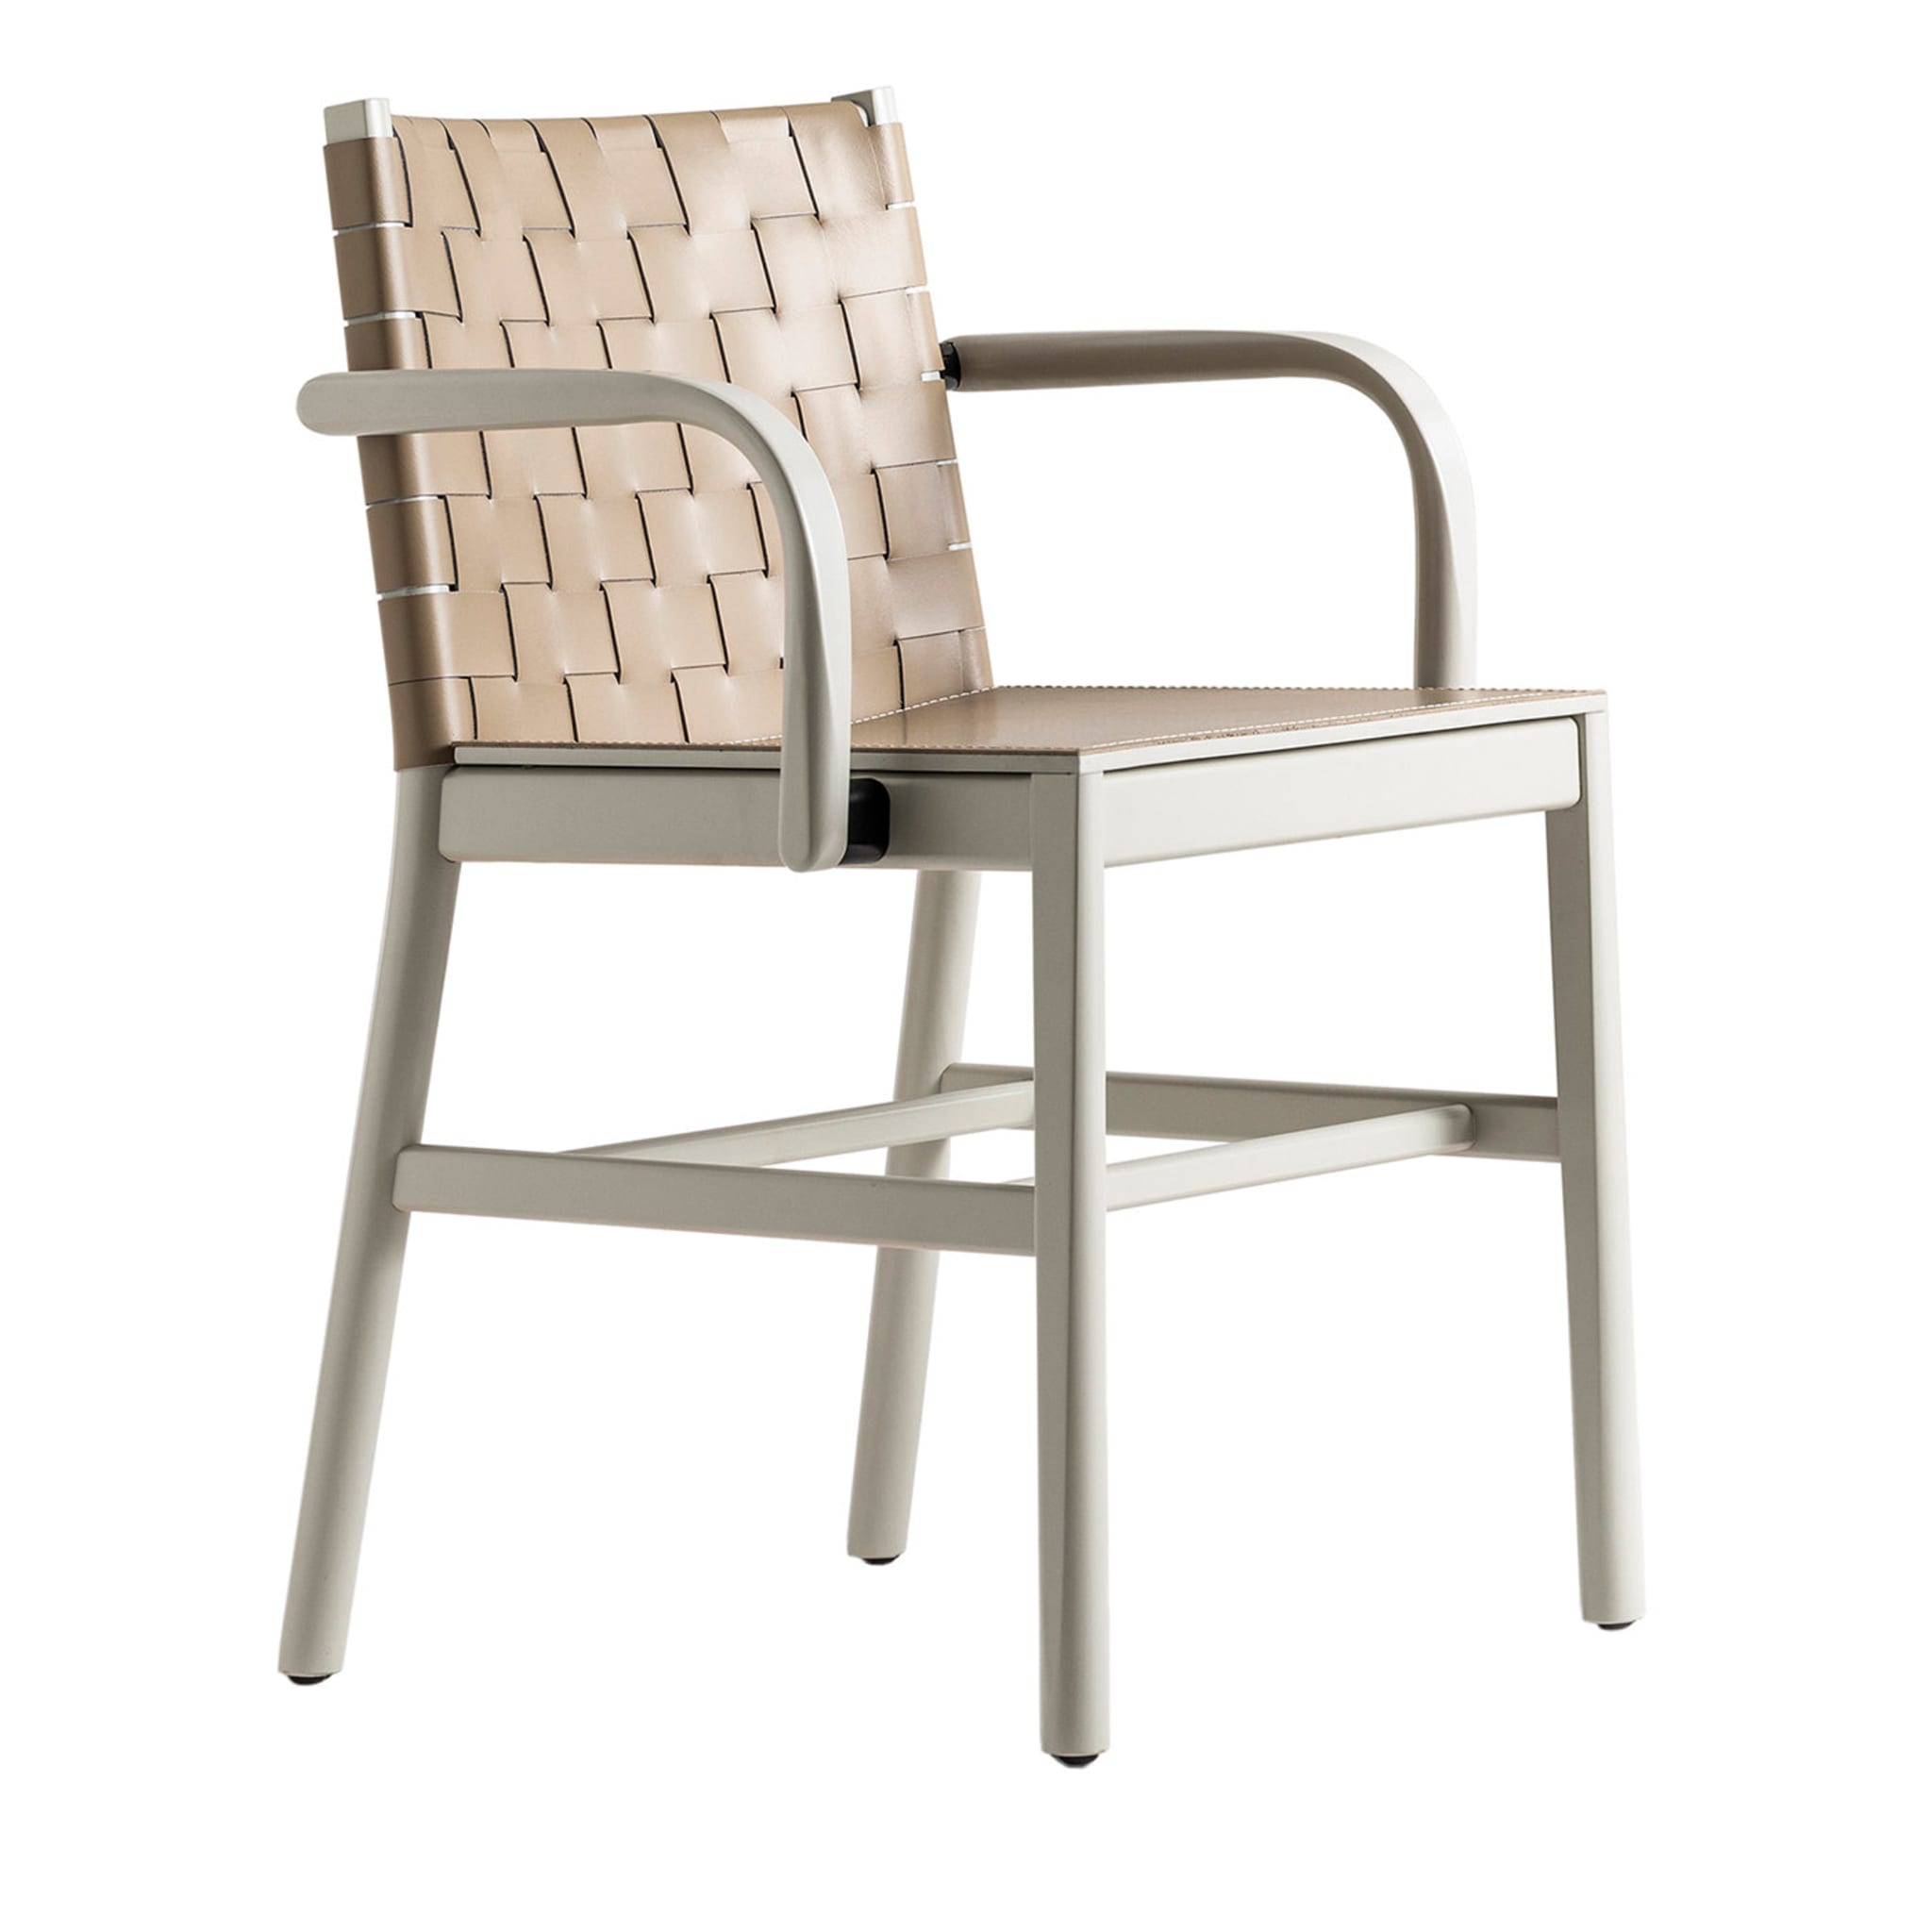 Julie IN Beige Dining Chair by Emilio Nanni - Main view